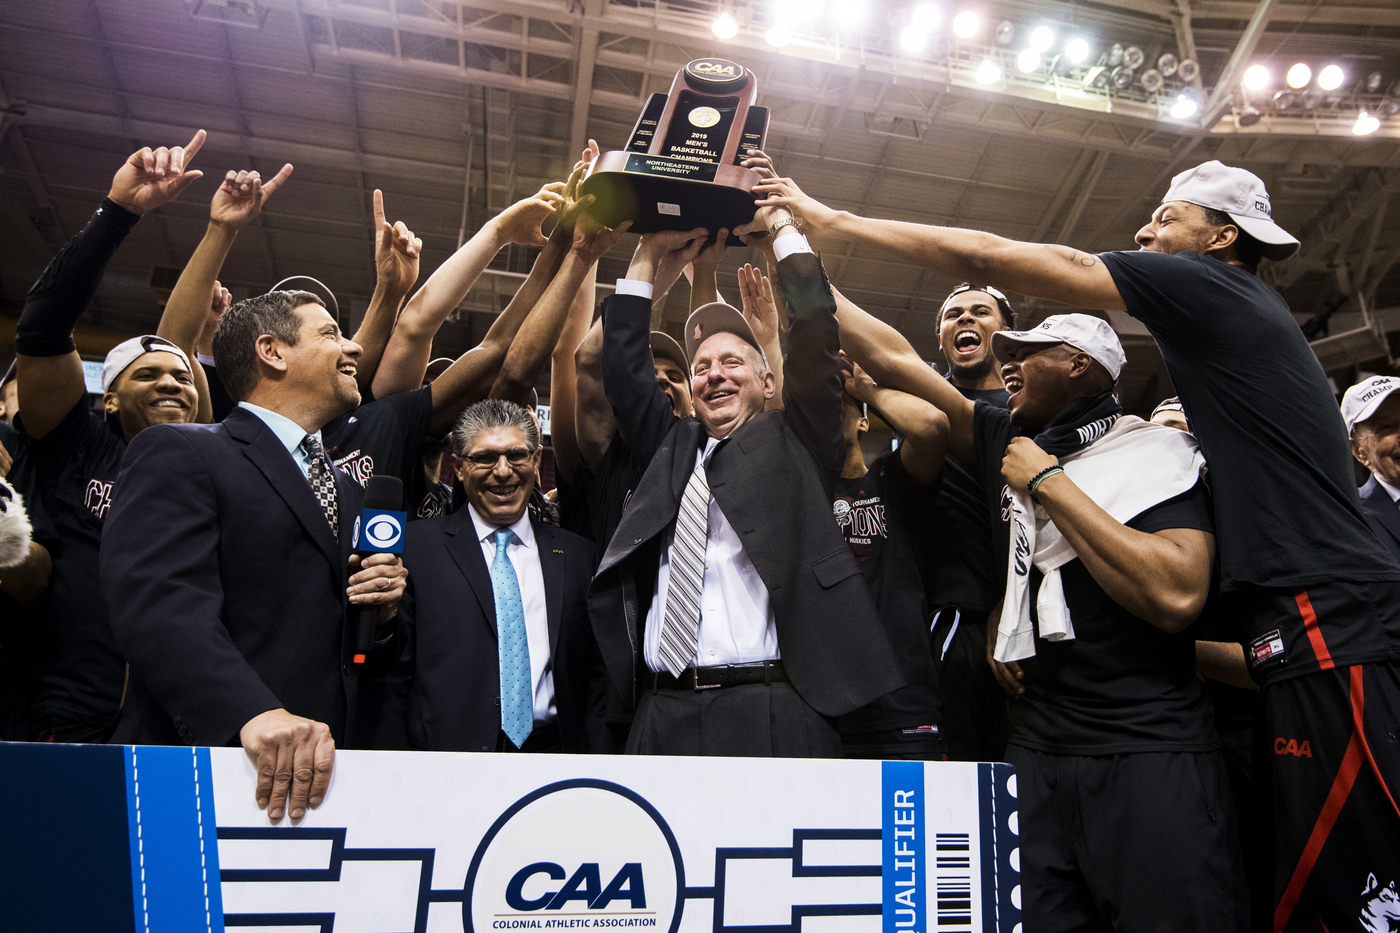 Bill Coen raising the CAA trophy, surrounded by players and reporters